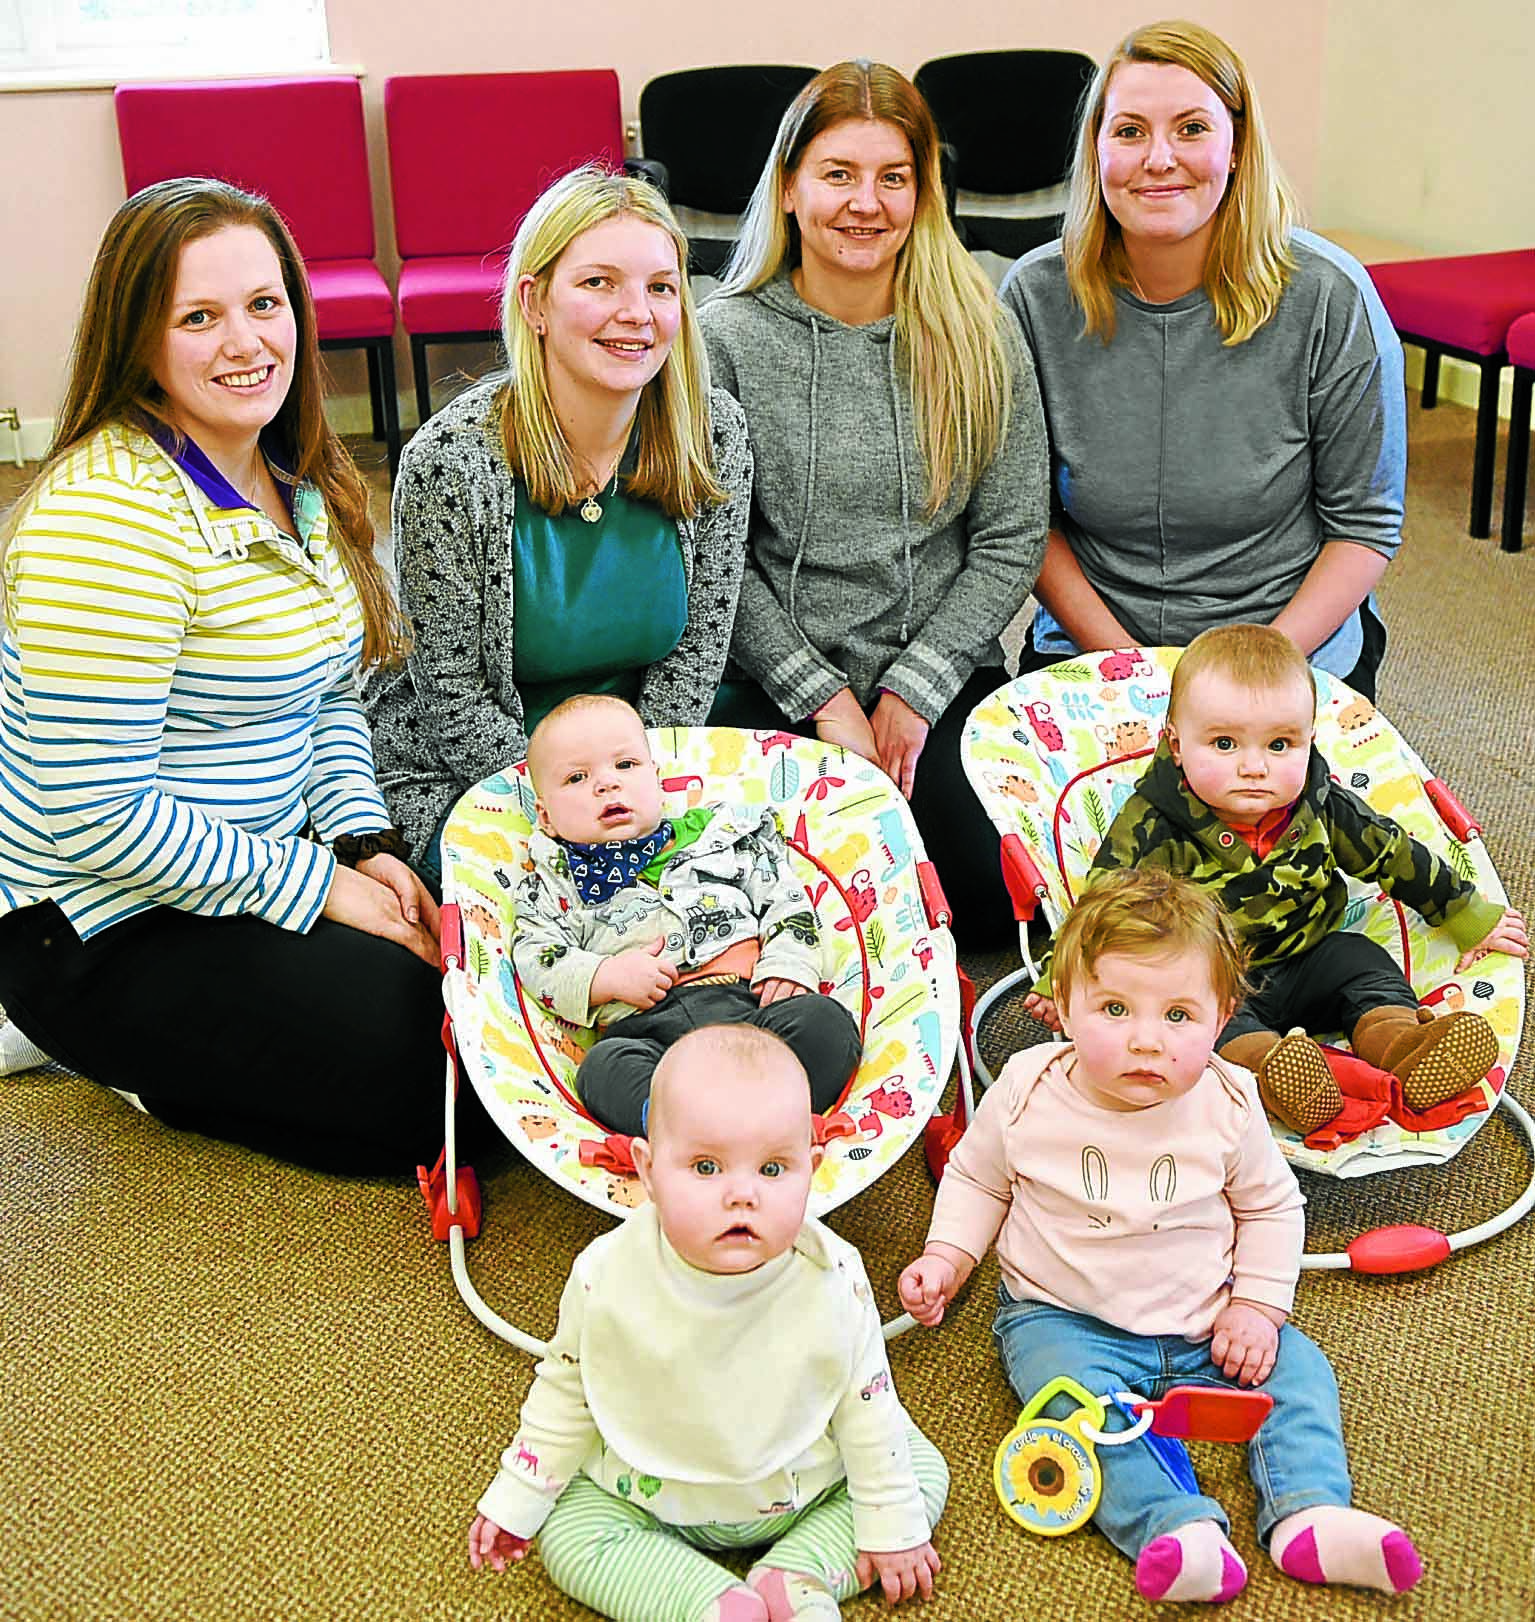 Mums get ready to offer peer support